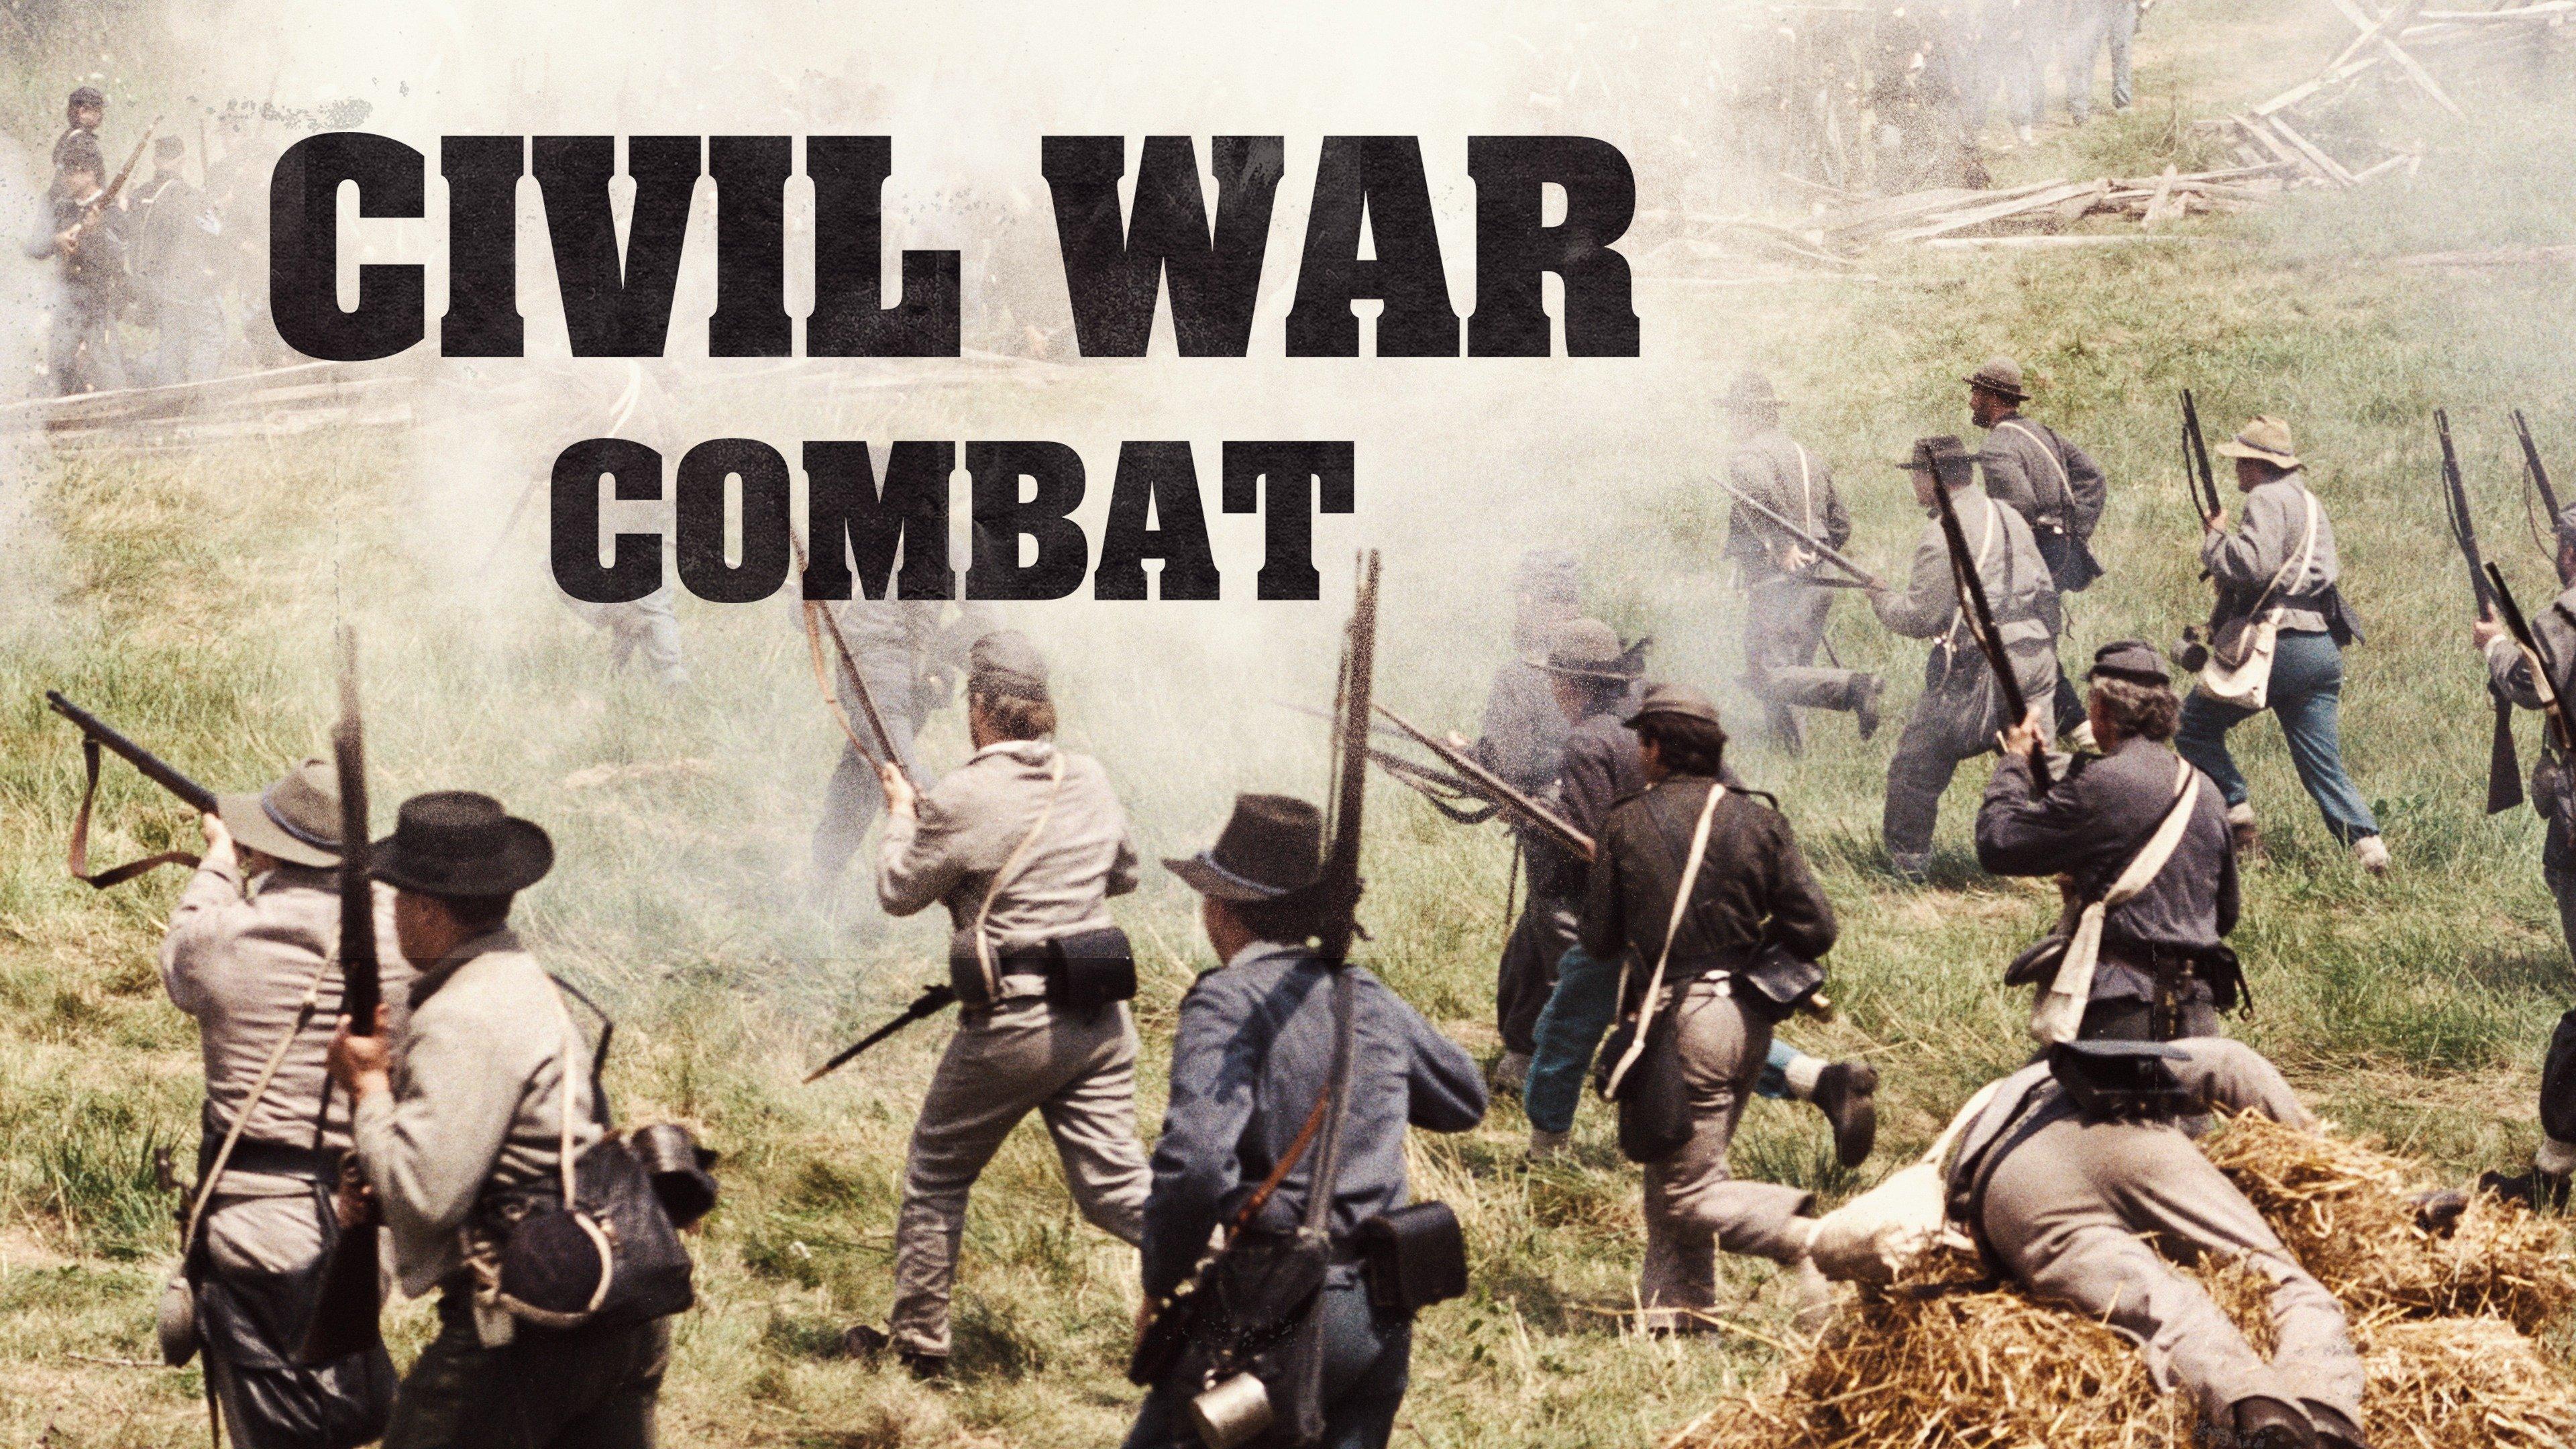 Watch Civil War Combat Streaming Online on Philo (Free Trial)